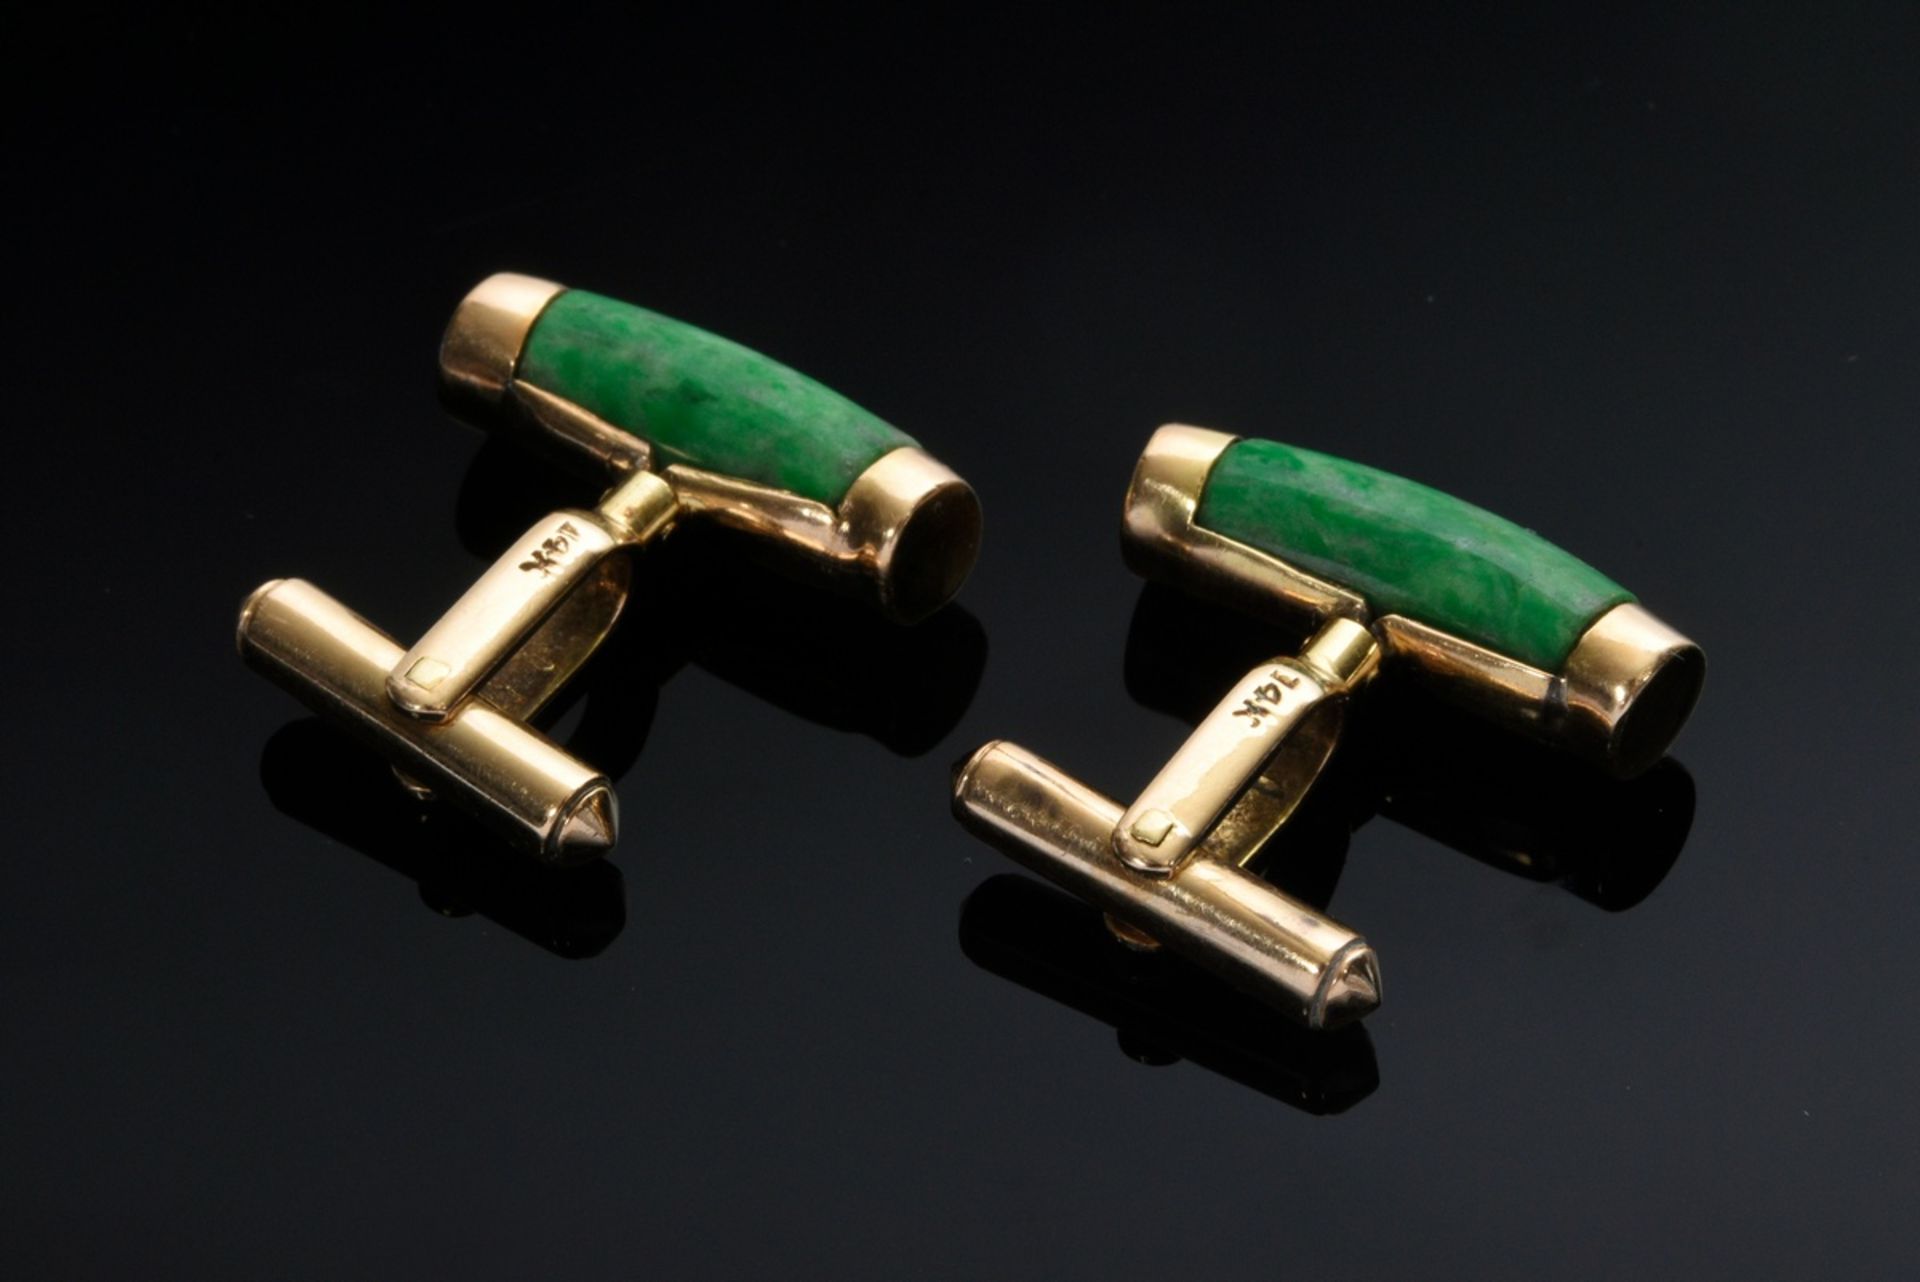 Pair of yellow gold 585 cufflinks with green jade toggle, 9.2g, bar length 2.2cm - Image 2 of 2